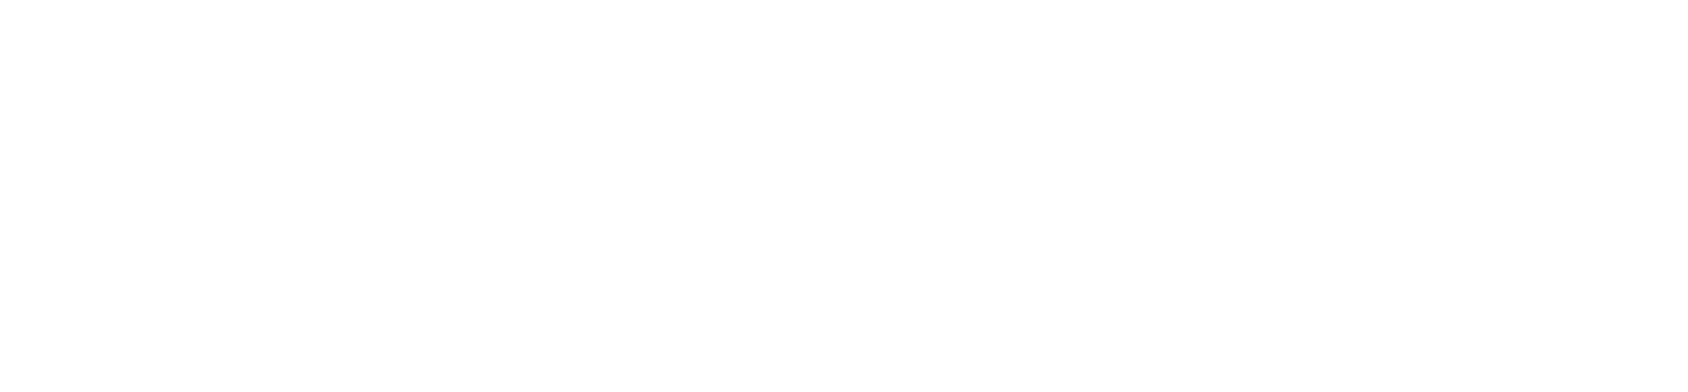 Auspacific Property Investment Group - Real Estate Agency